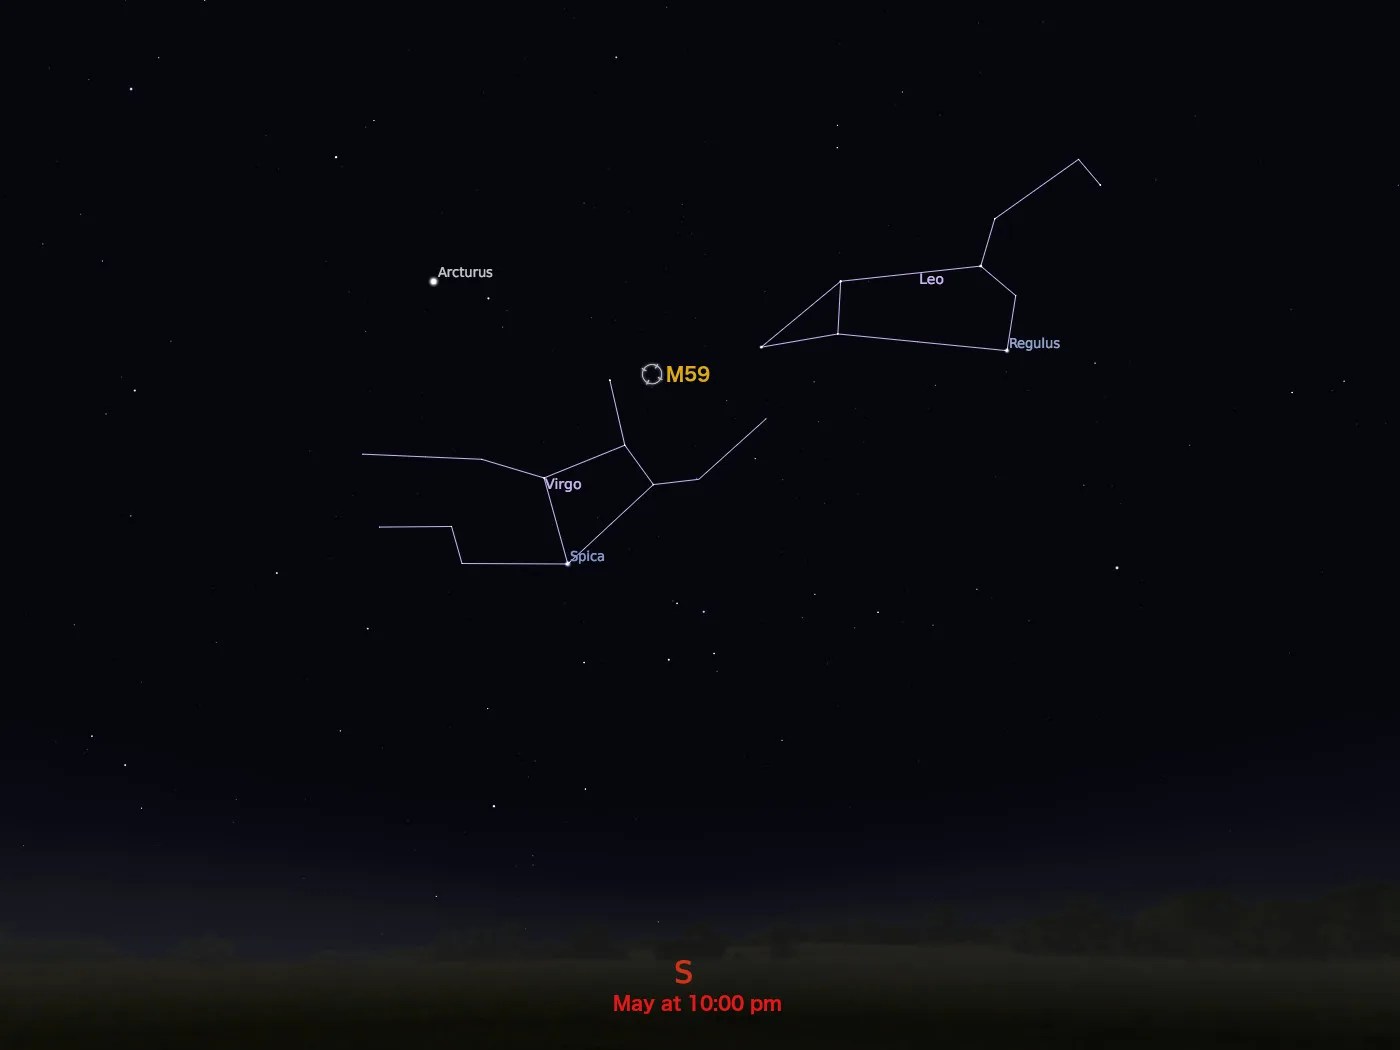 star chart showing location in night sky of M59